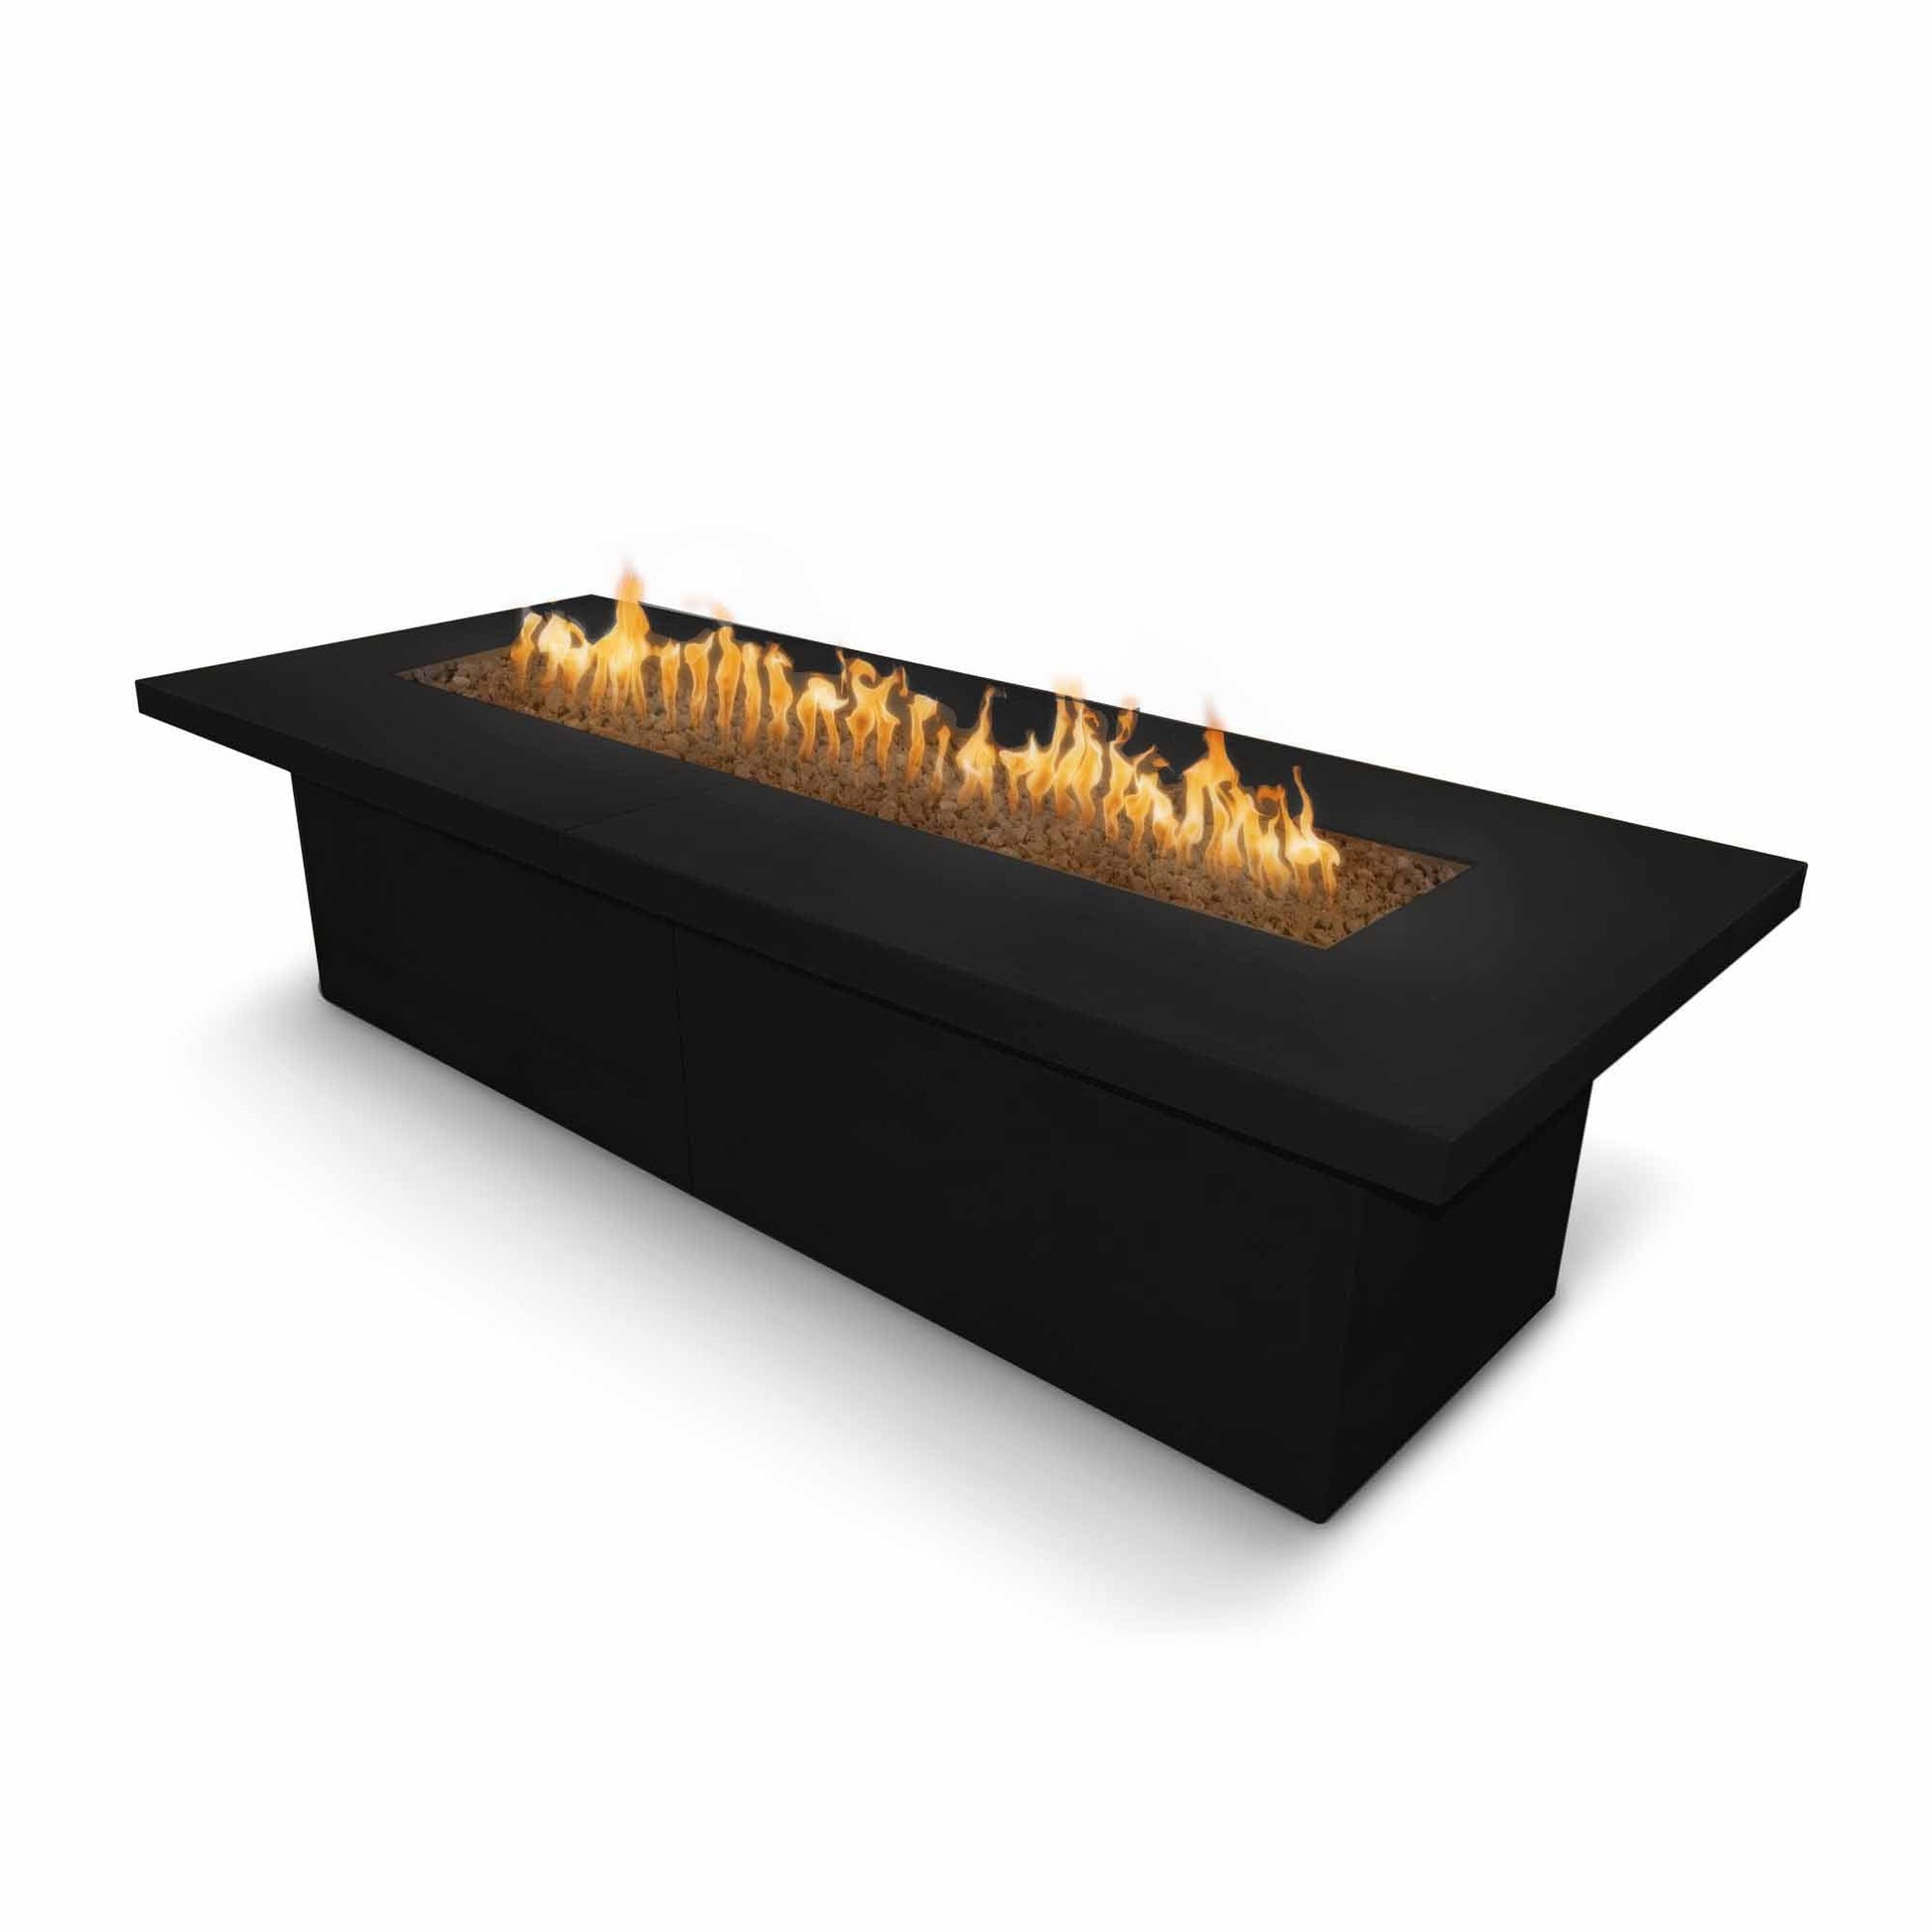 The Outdoor Plus Rectangular Newport 72" Black Powder Coated Metal Liquid Propane Fire Pit with Flame Sense with Spark Ignition